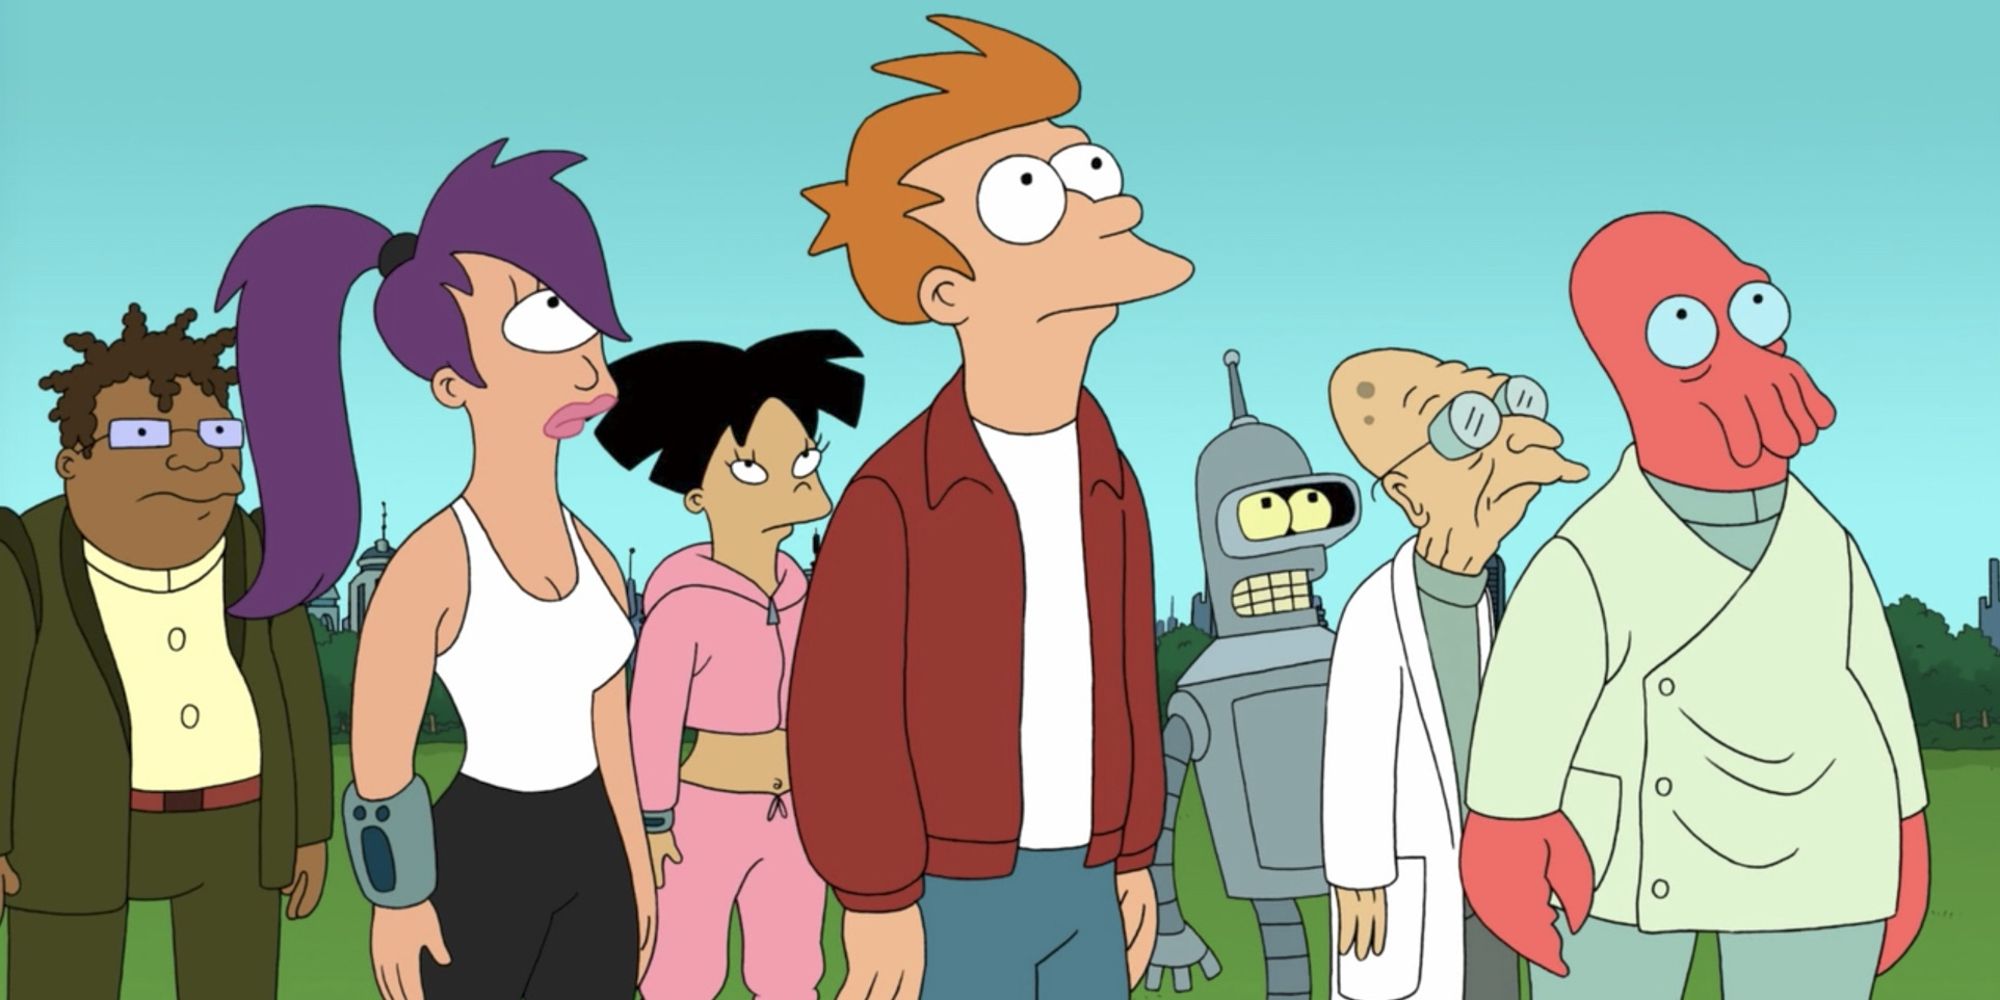 The cast of character from the adult animated series Futurama.